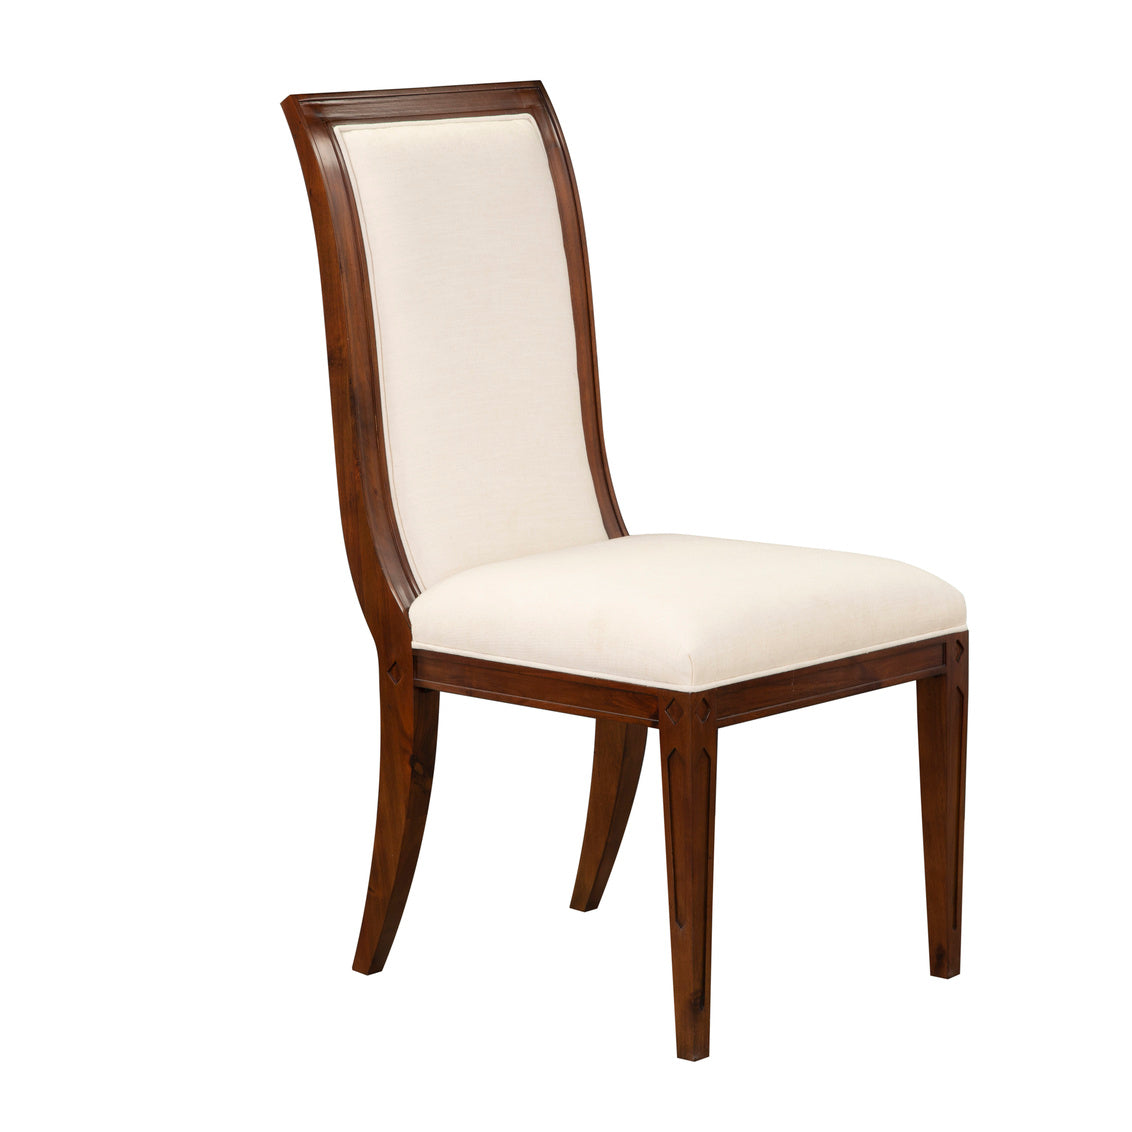 Alden Parkes, Aimee Dining Side Chair